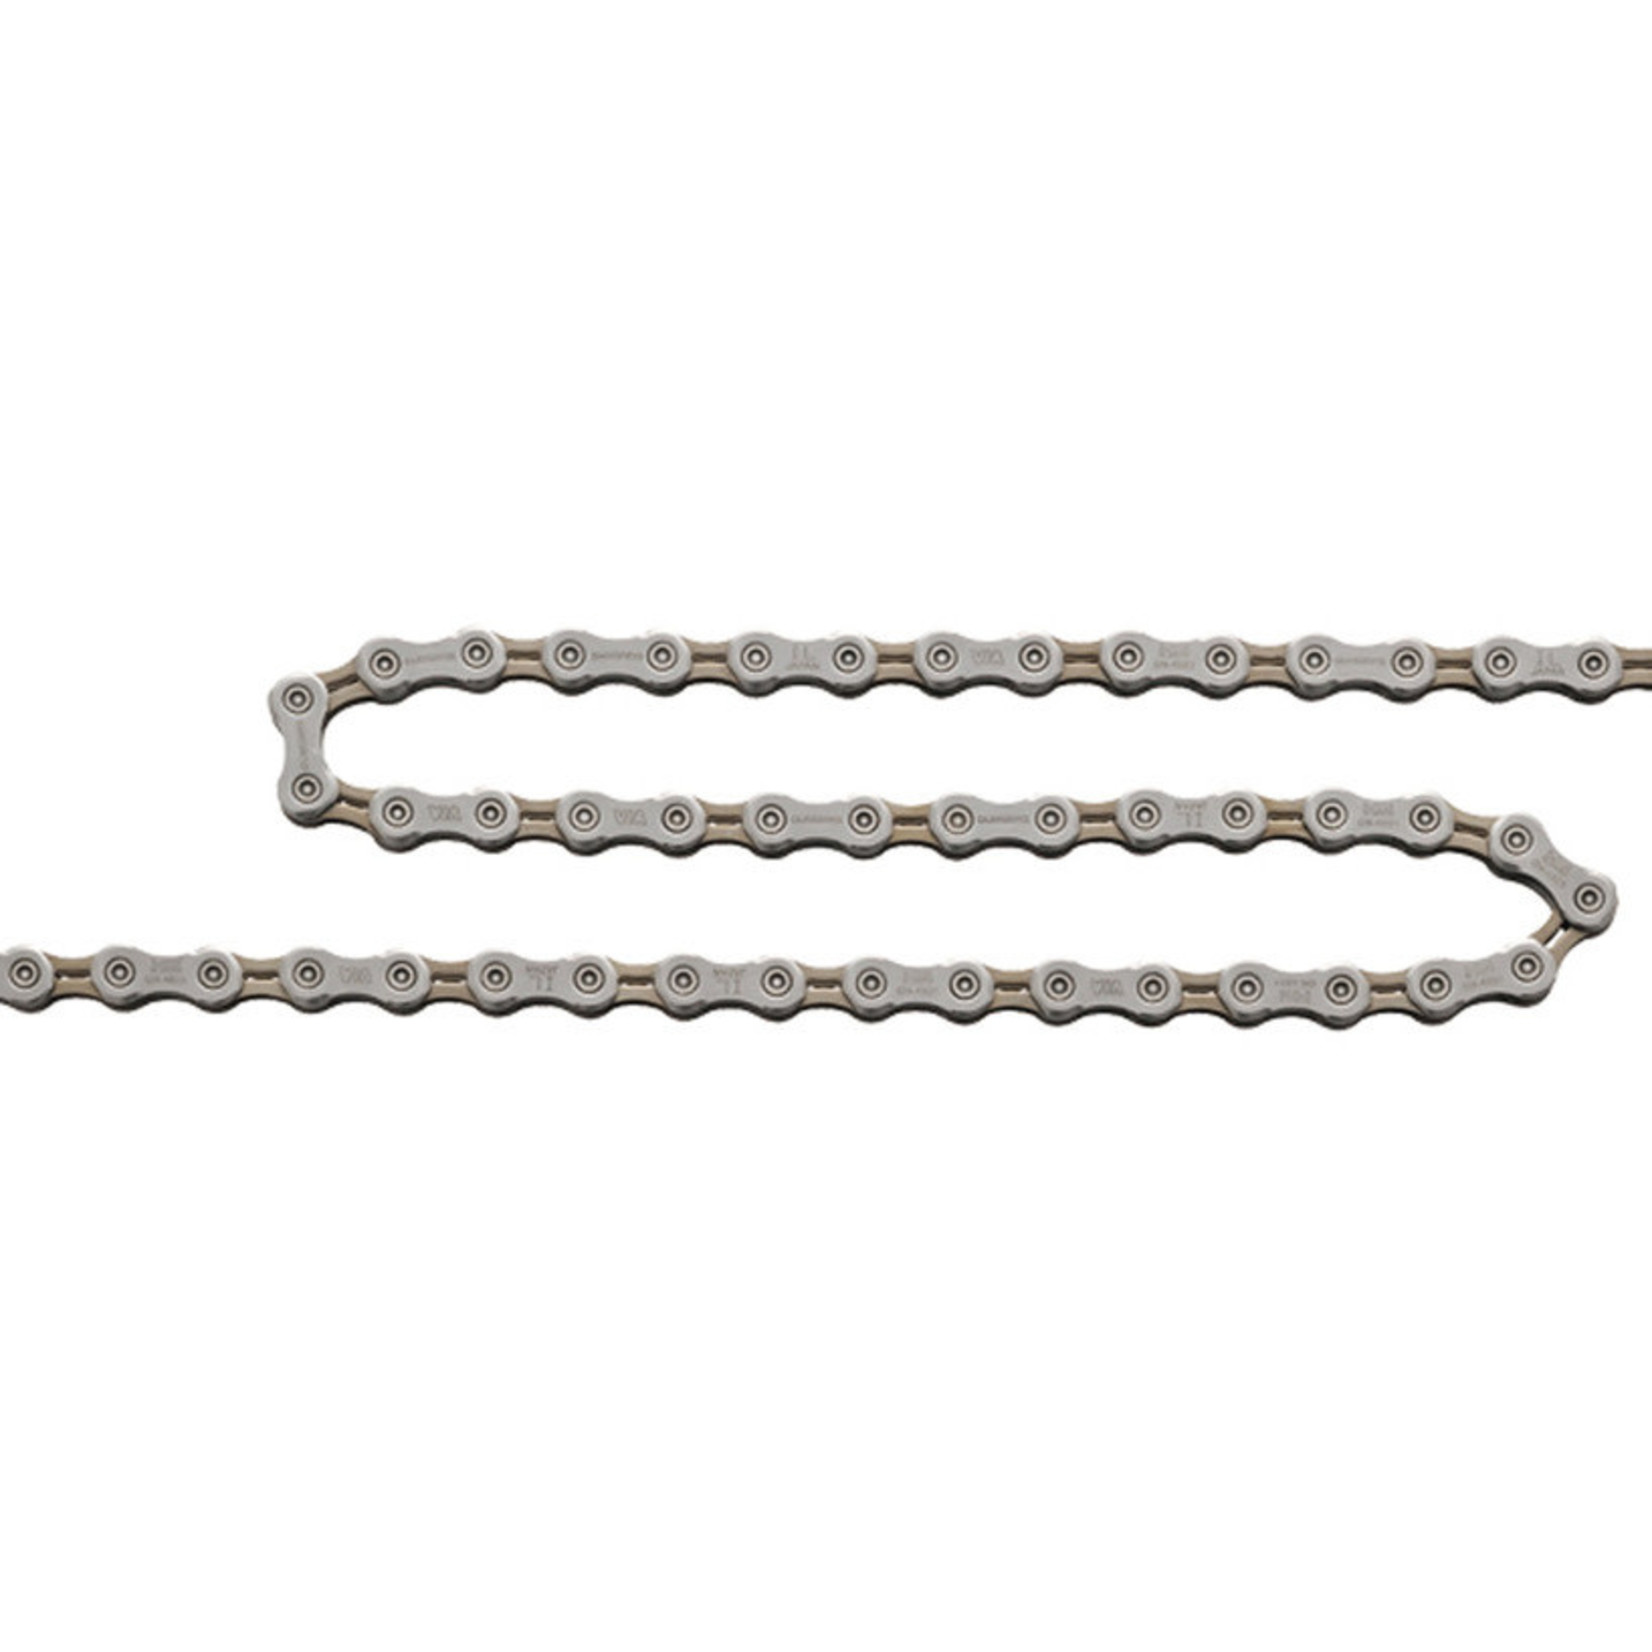 Shimano CHAIN, CN-4601, TIAGRA, FOR 10-SPEED, 116 LINKS, CONNECT PIN X 1